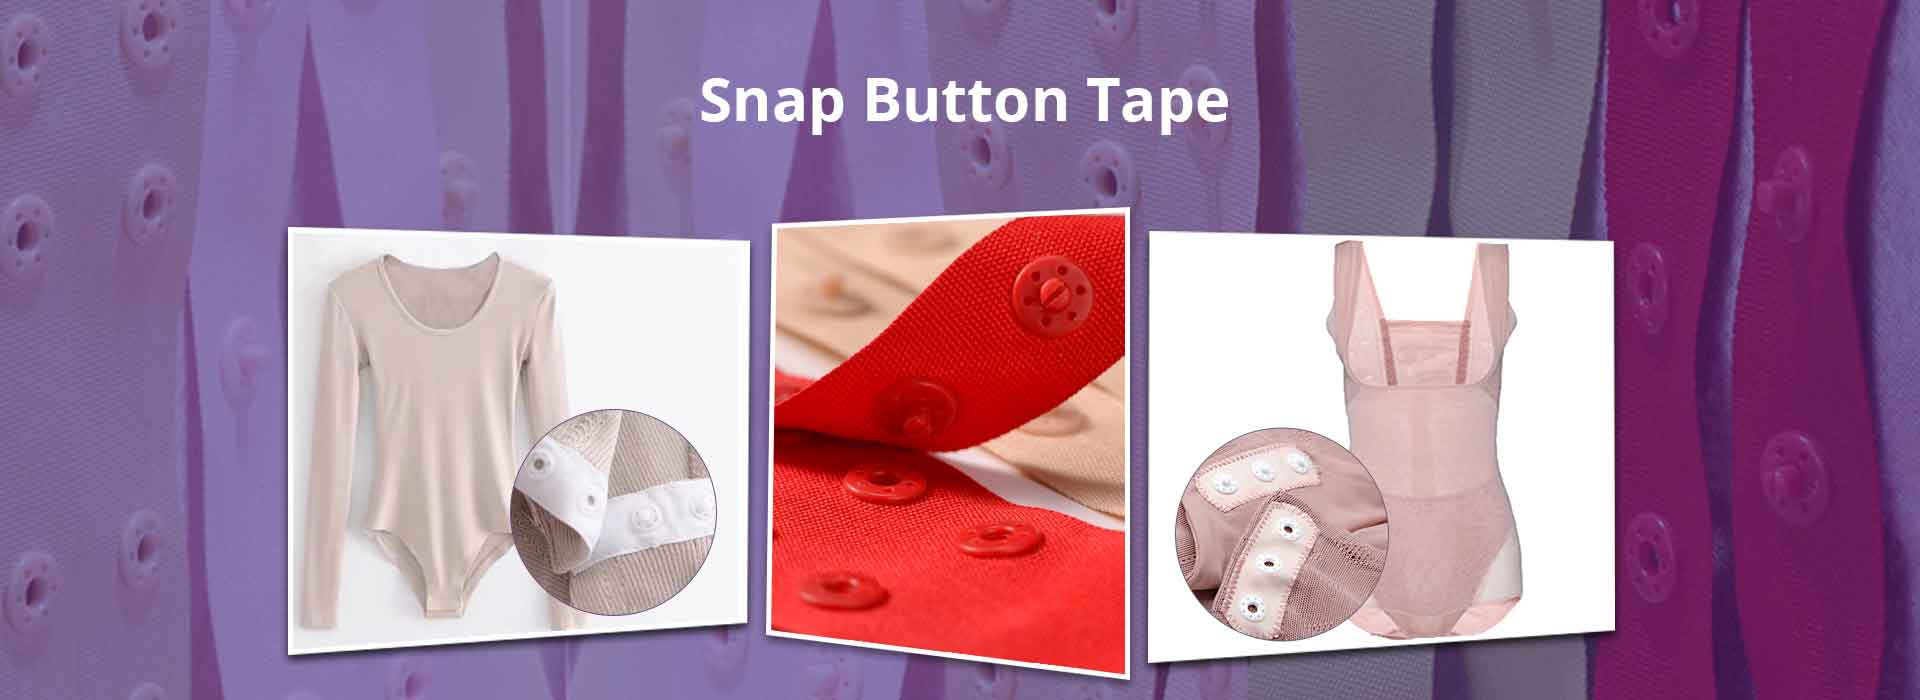 Snap Button Tape